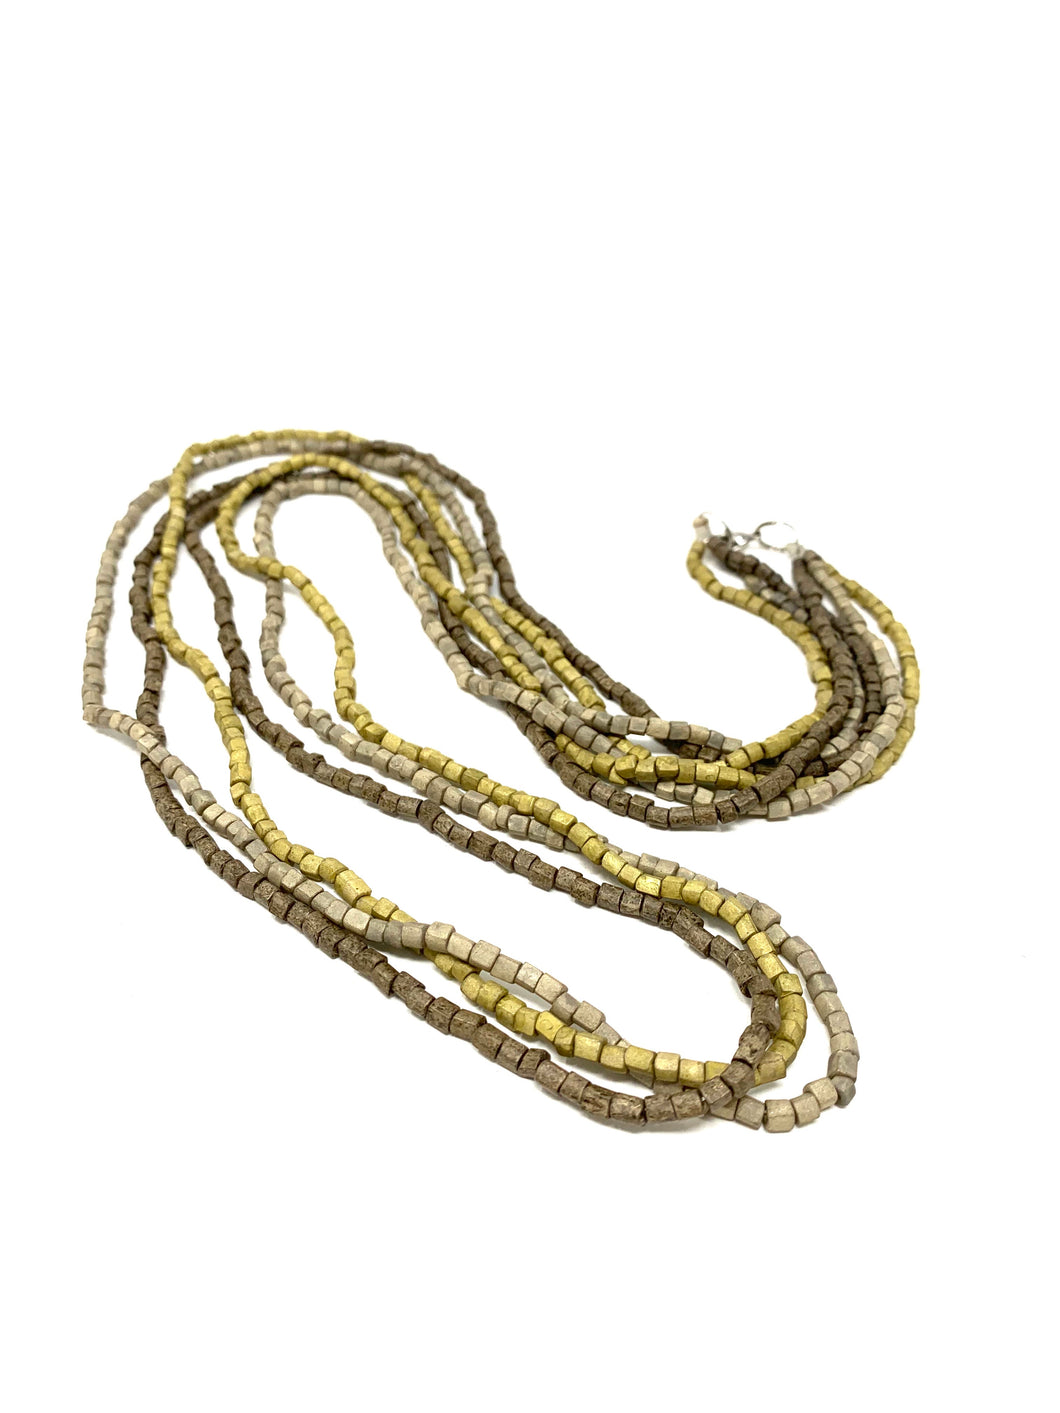 Earth Tone Seed Bead Multi-Layer Necklace